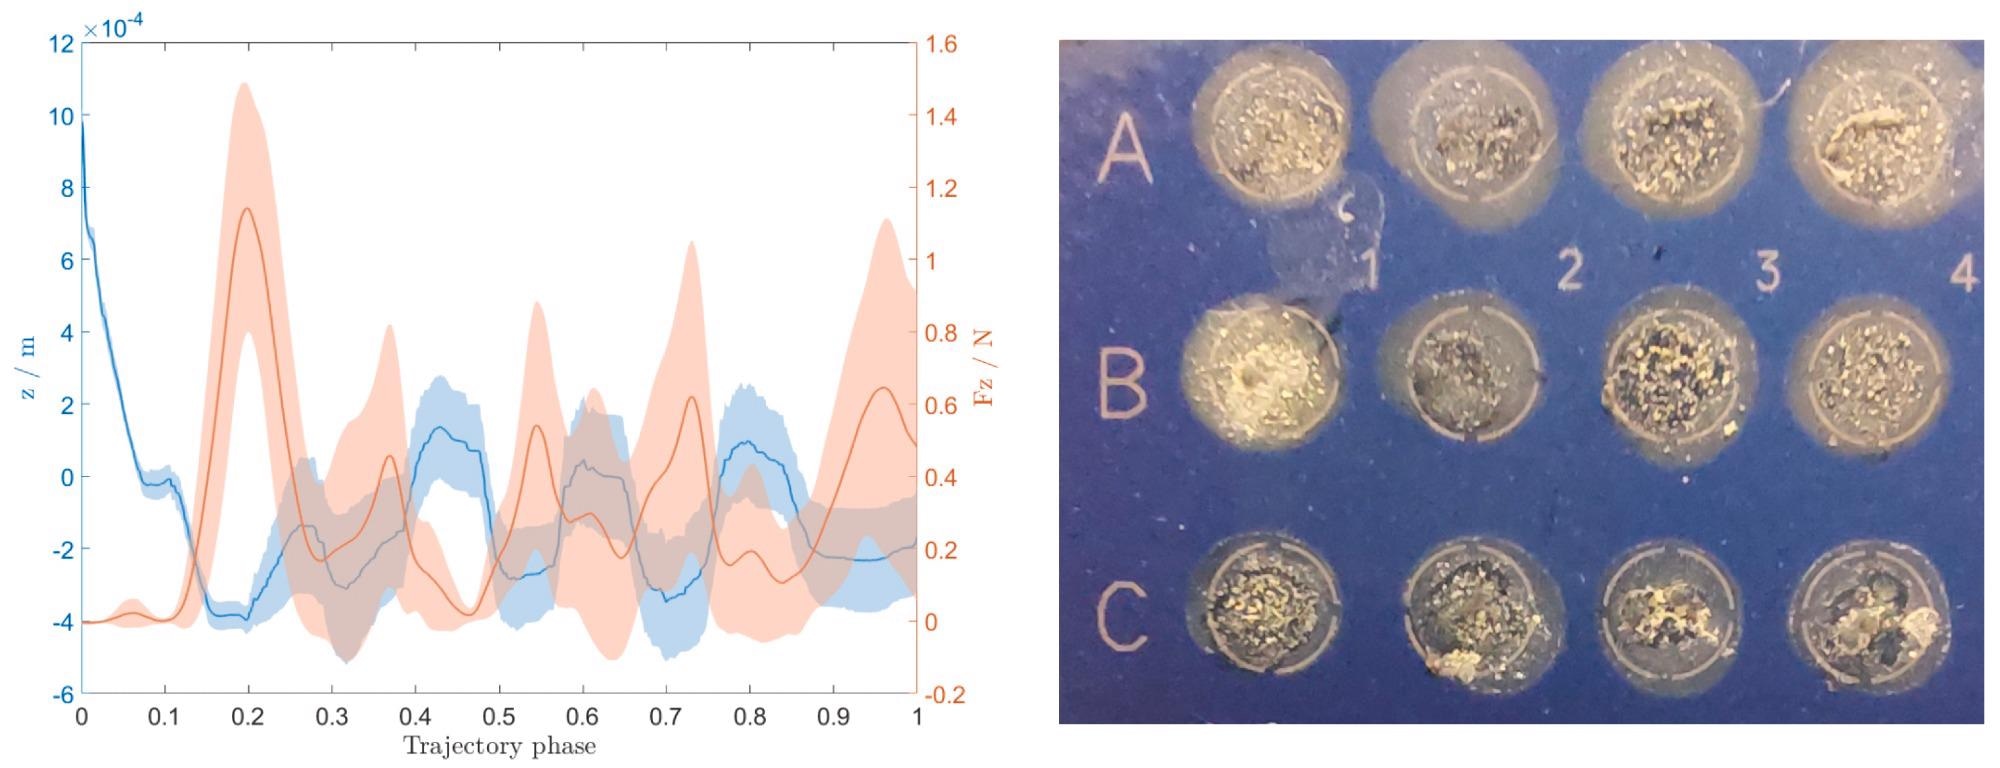 The contact force between the end–effector needle and MALDI target plate and the corresponding compensated z position (left), and an image of deposited colonies on the MALDI target plate after being covered with the matrix solution (right).